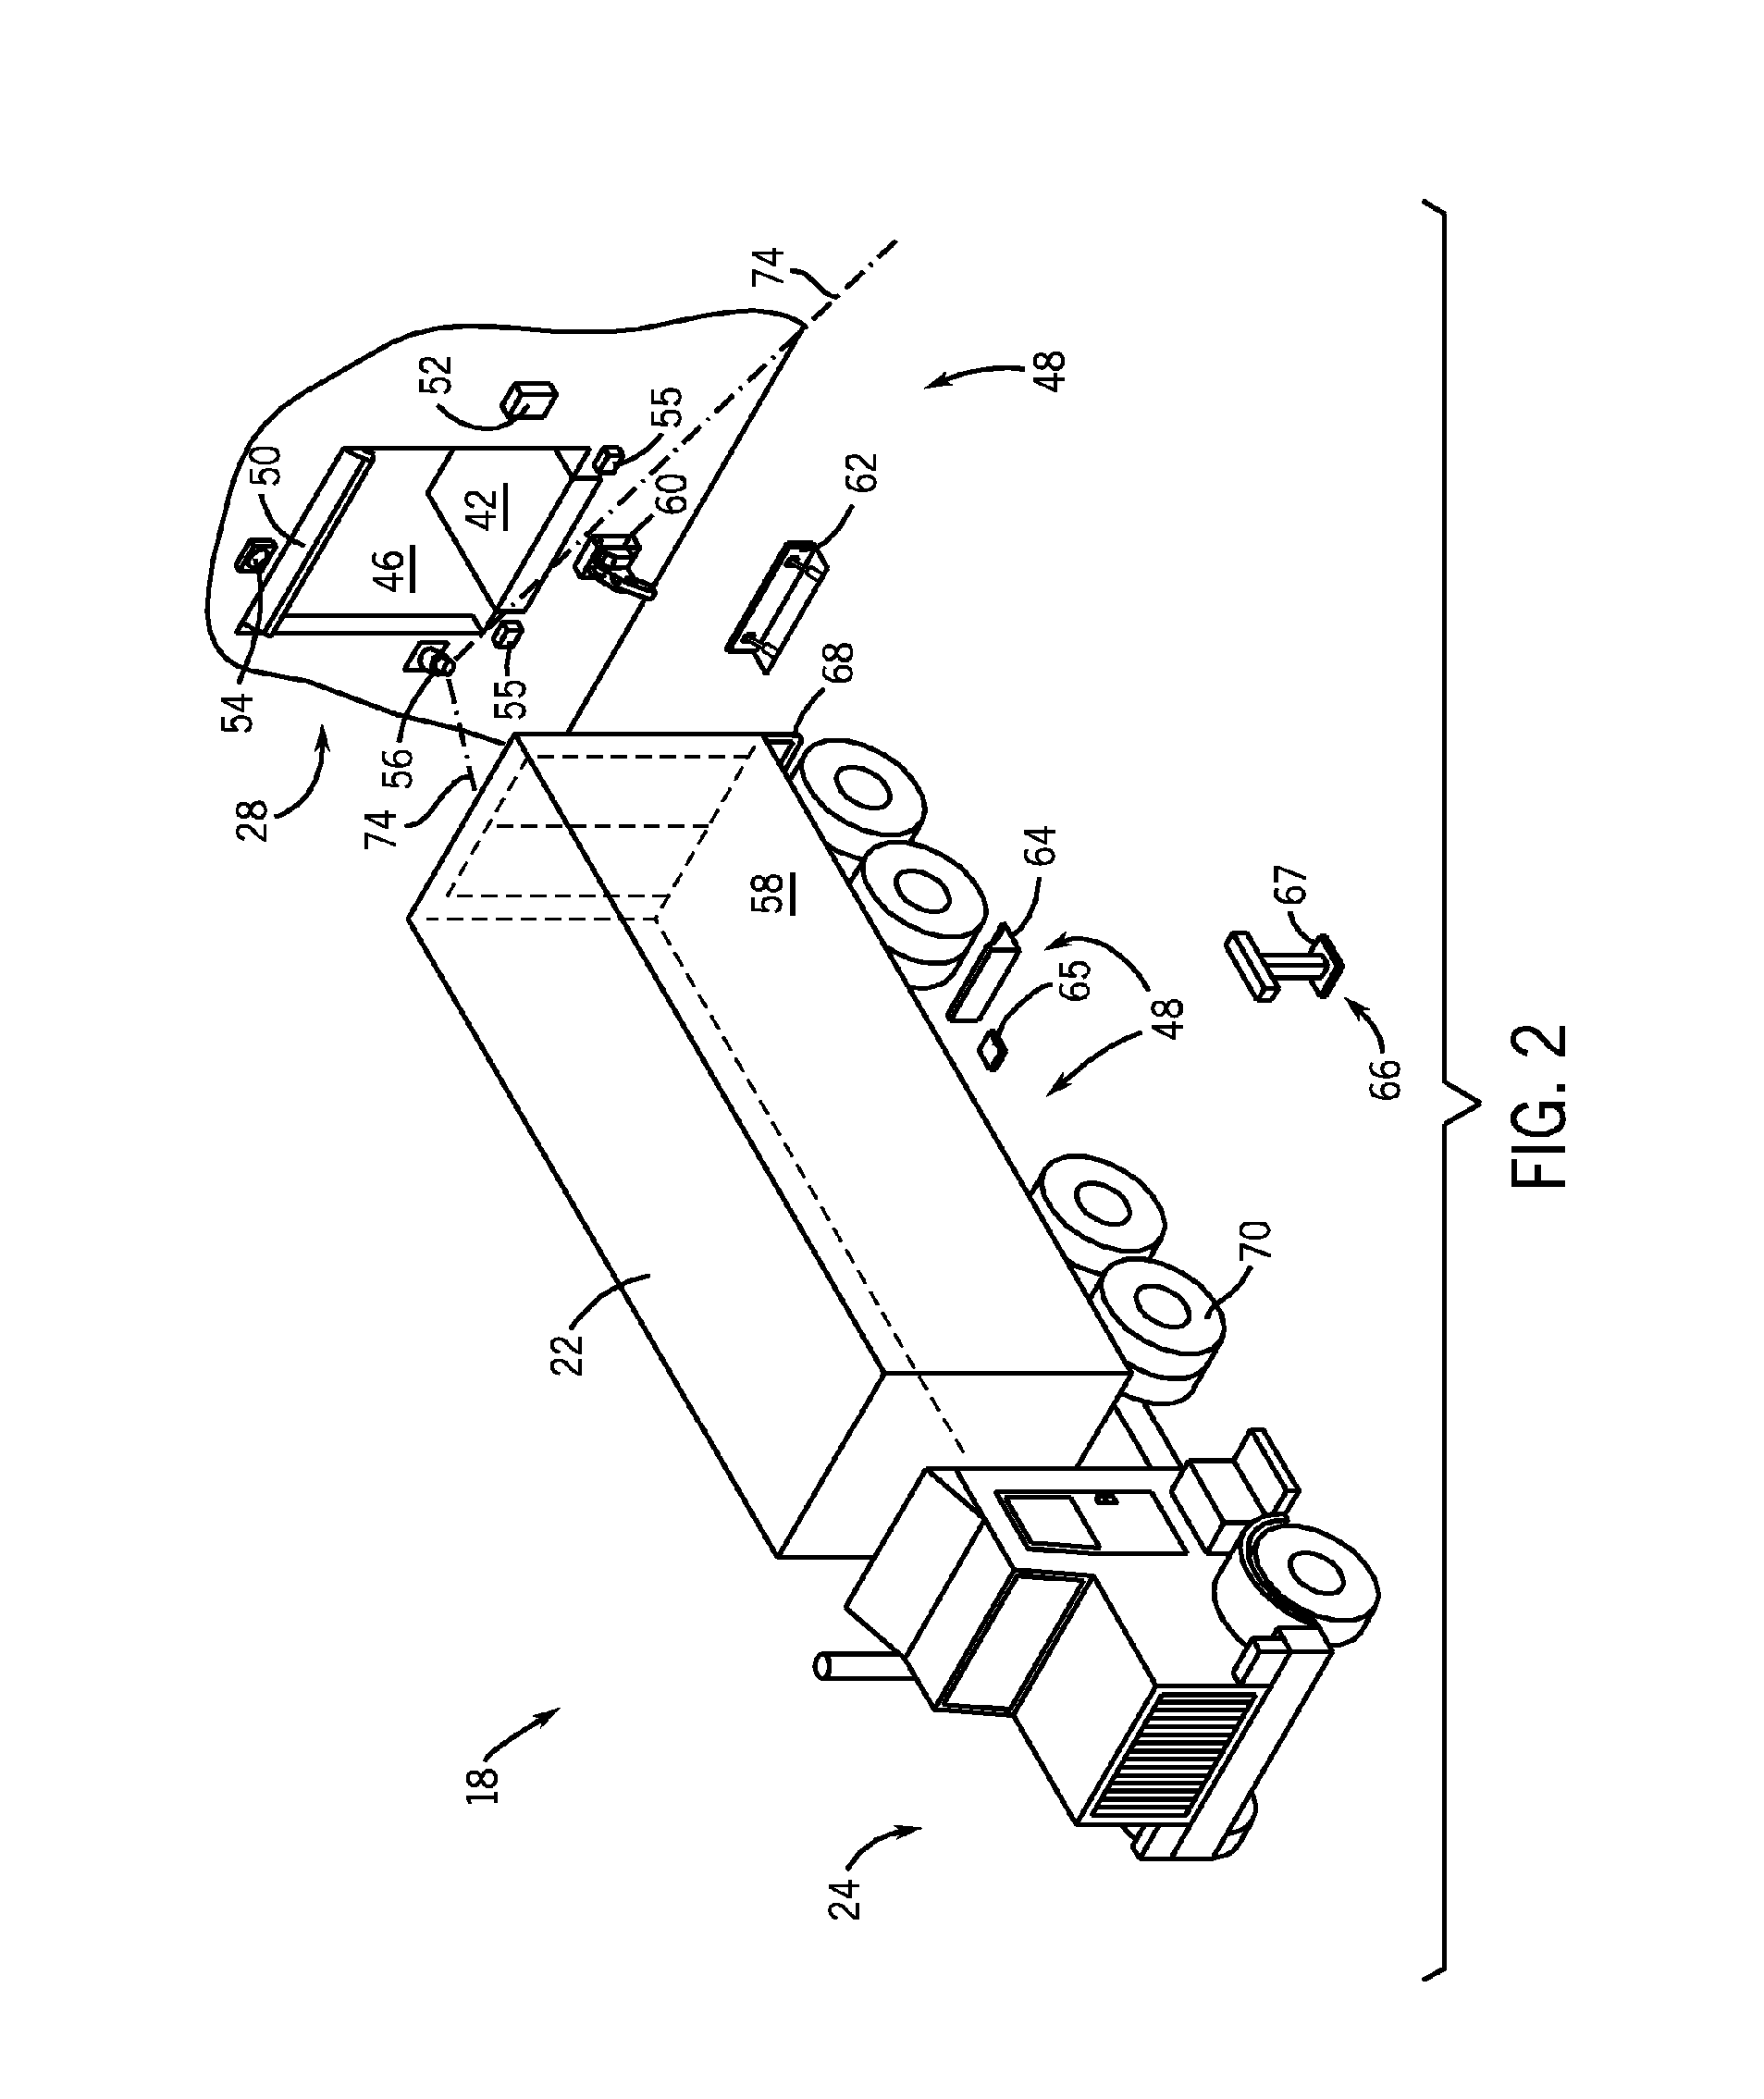 System and method for remotely controlling docking station components